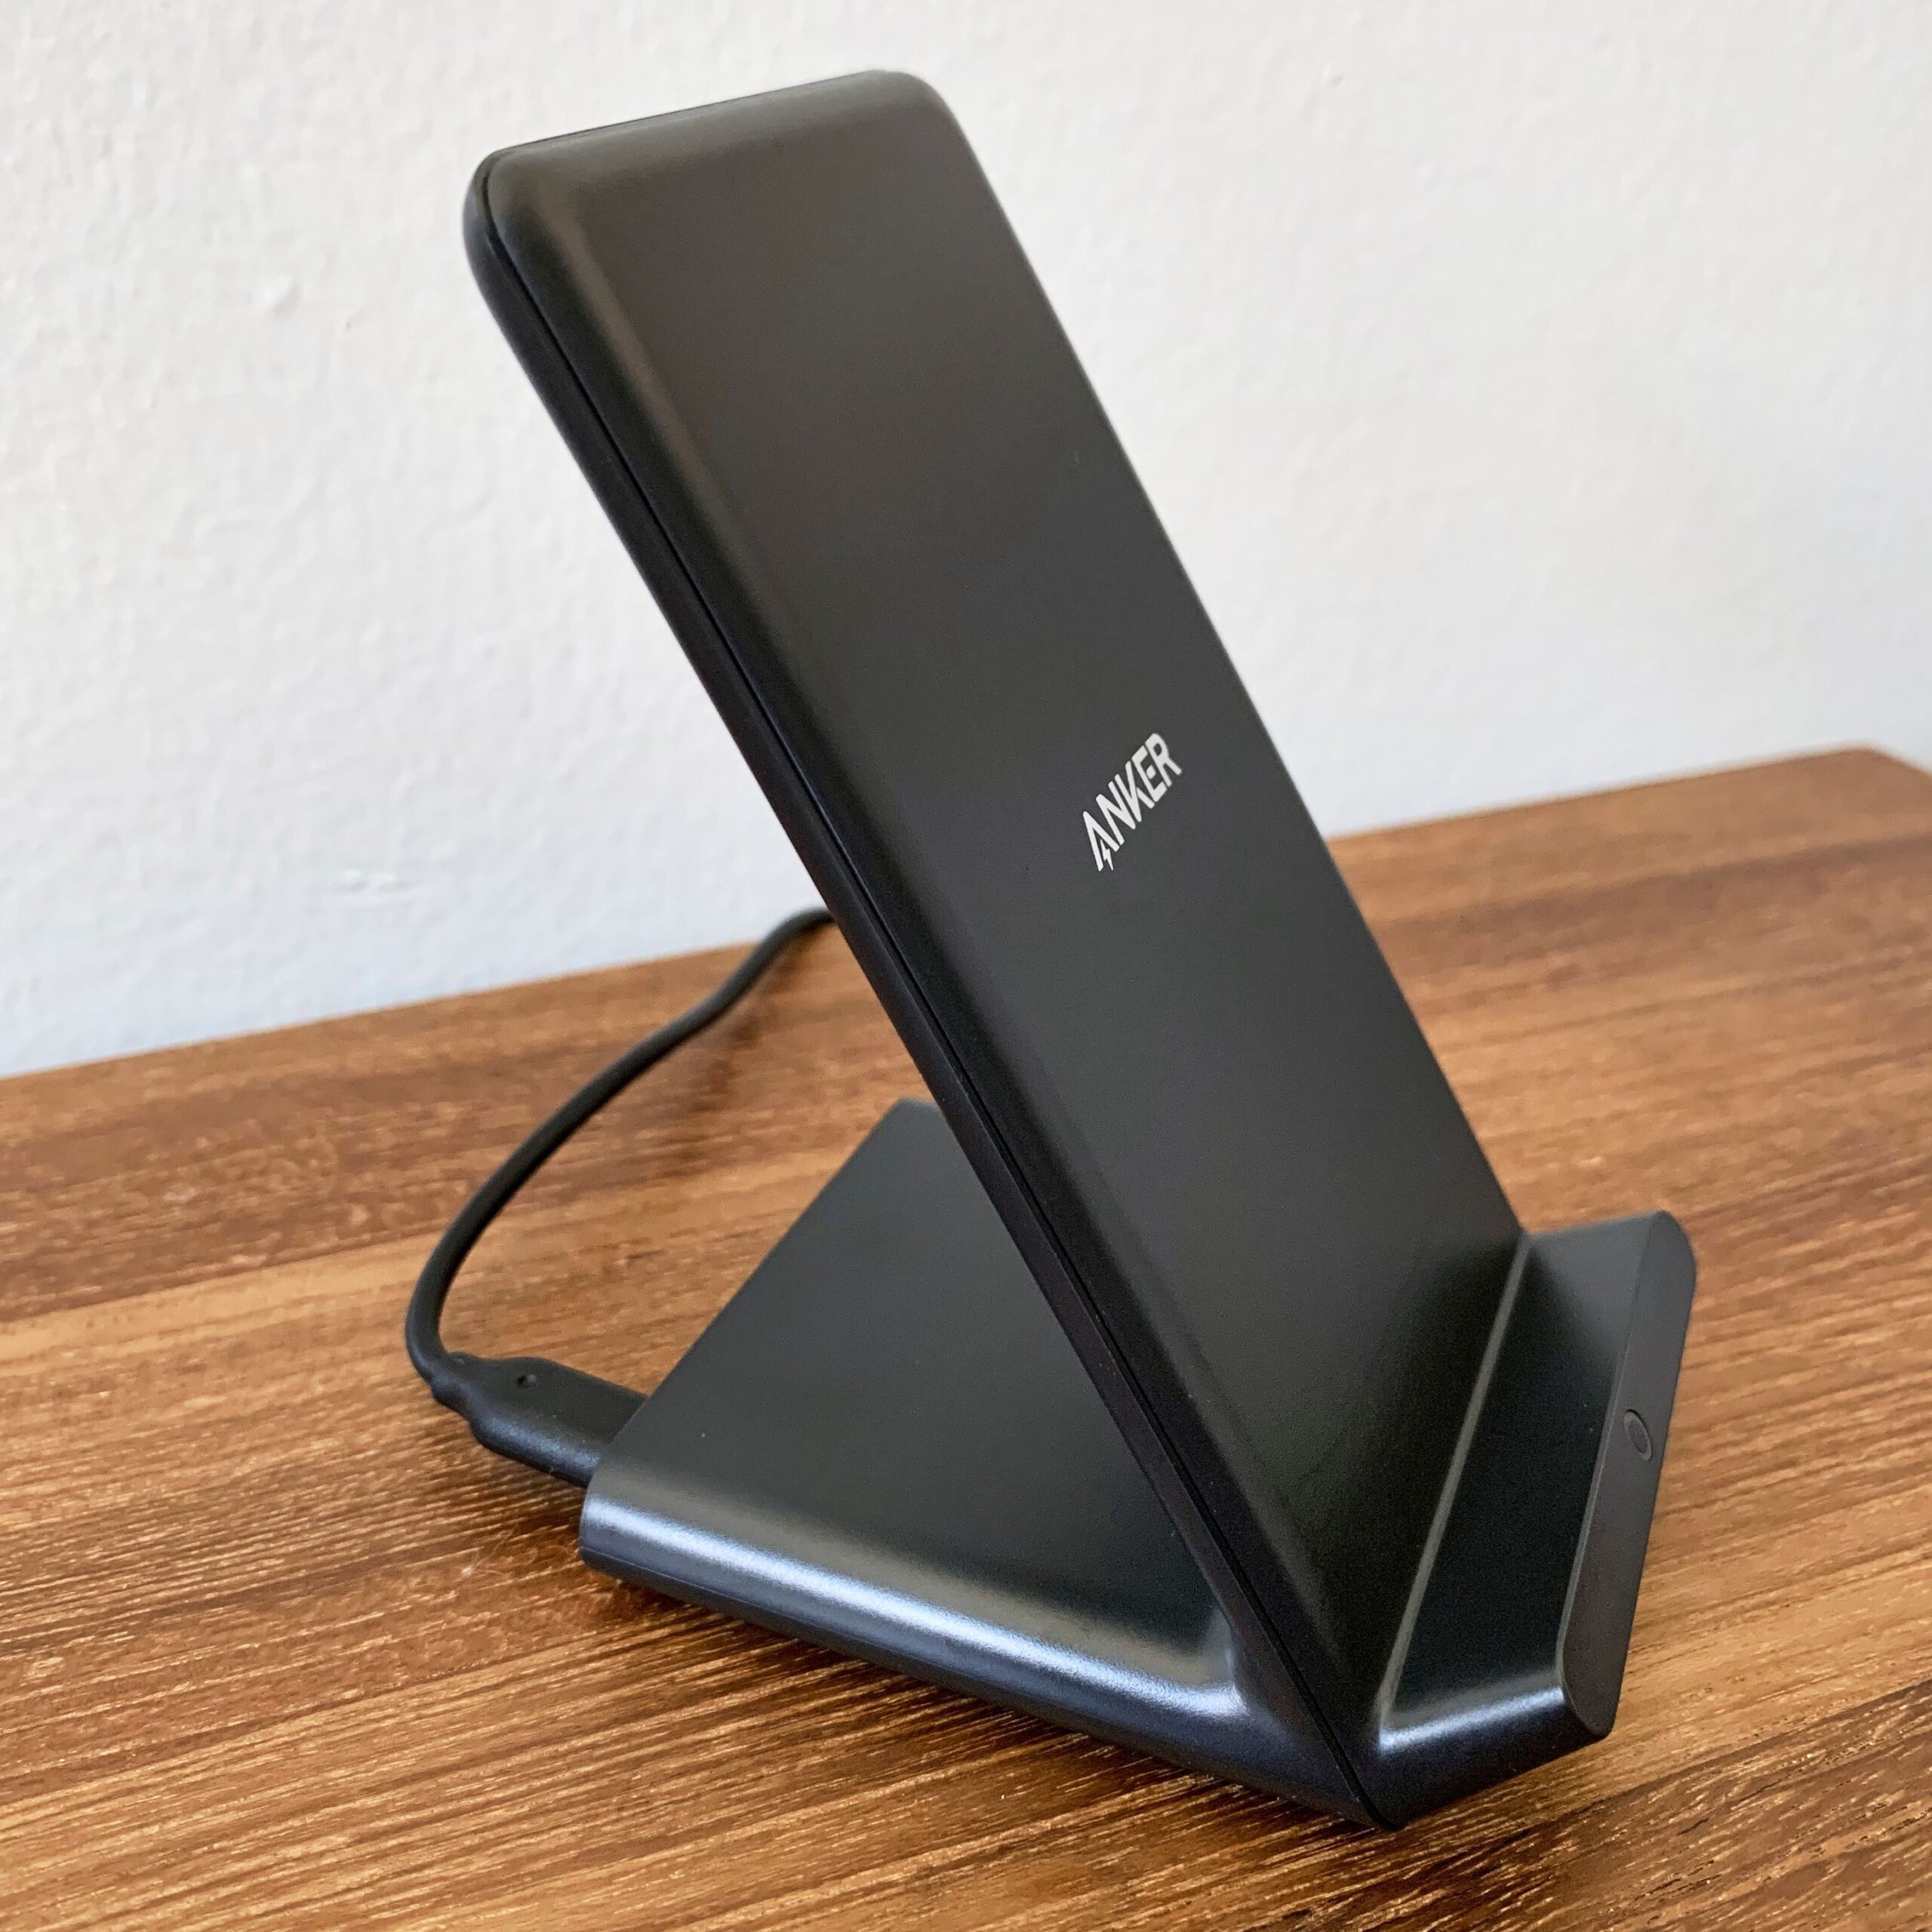 Anker Wireless Charger Stand.